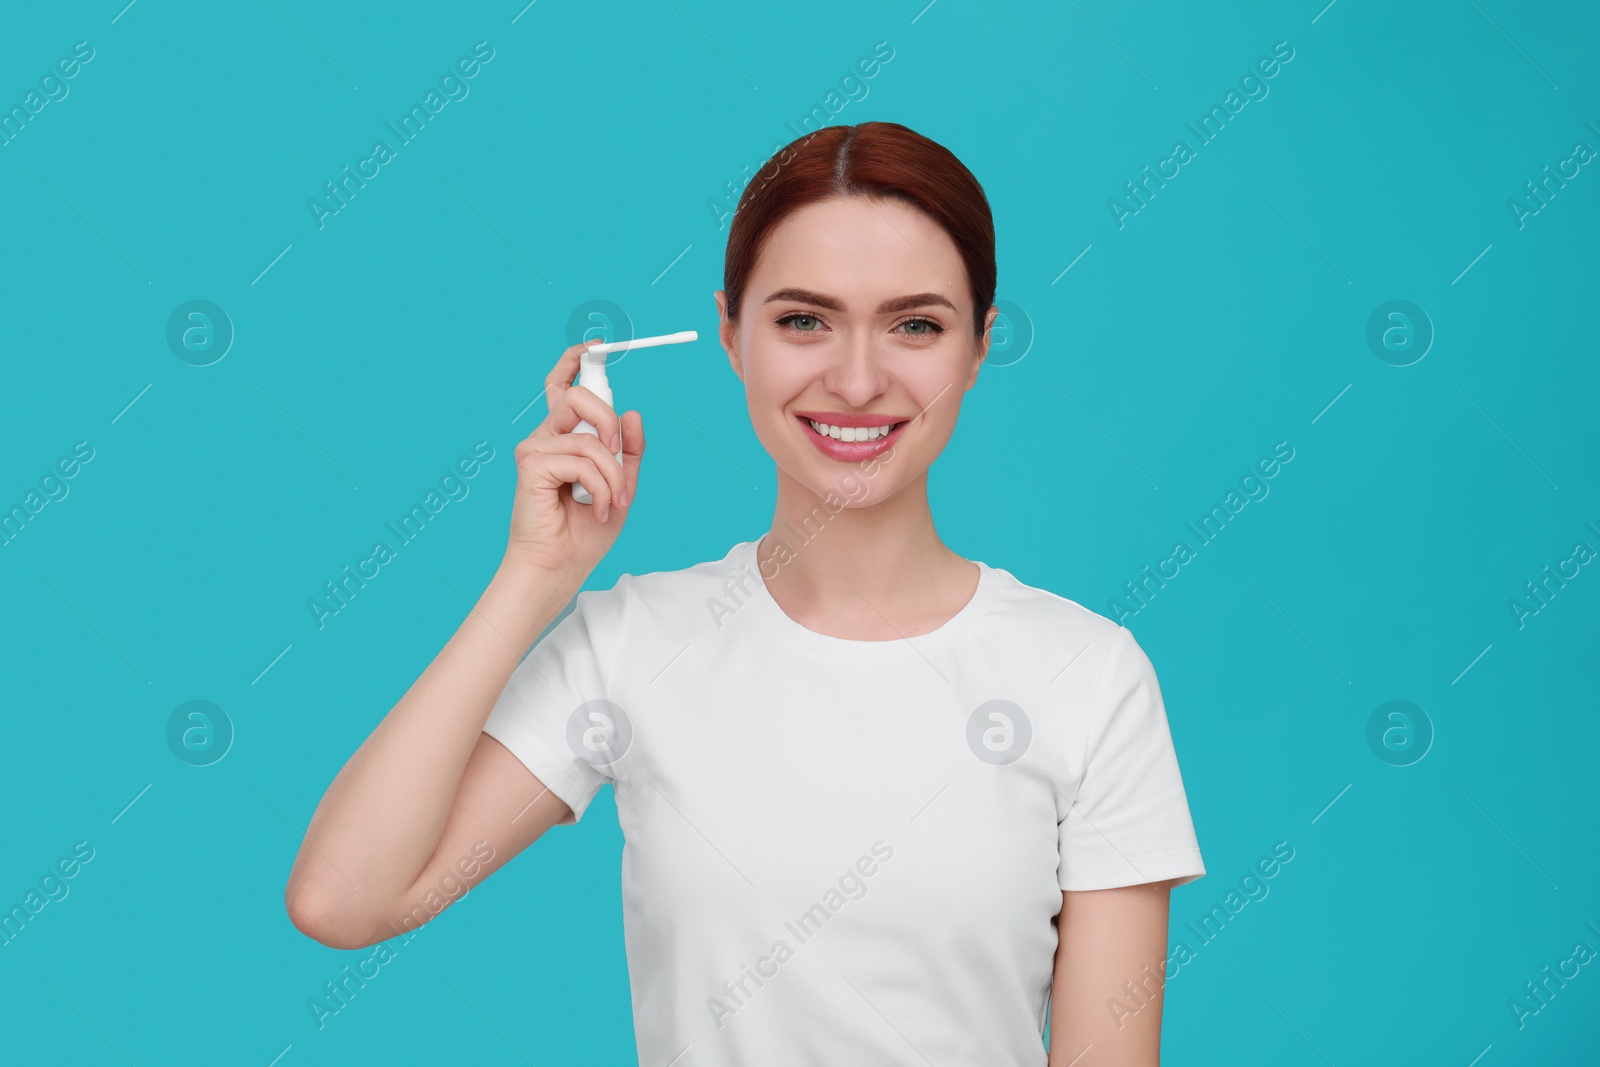 Photo of Woman using ear spray on light blue background